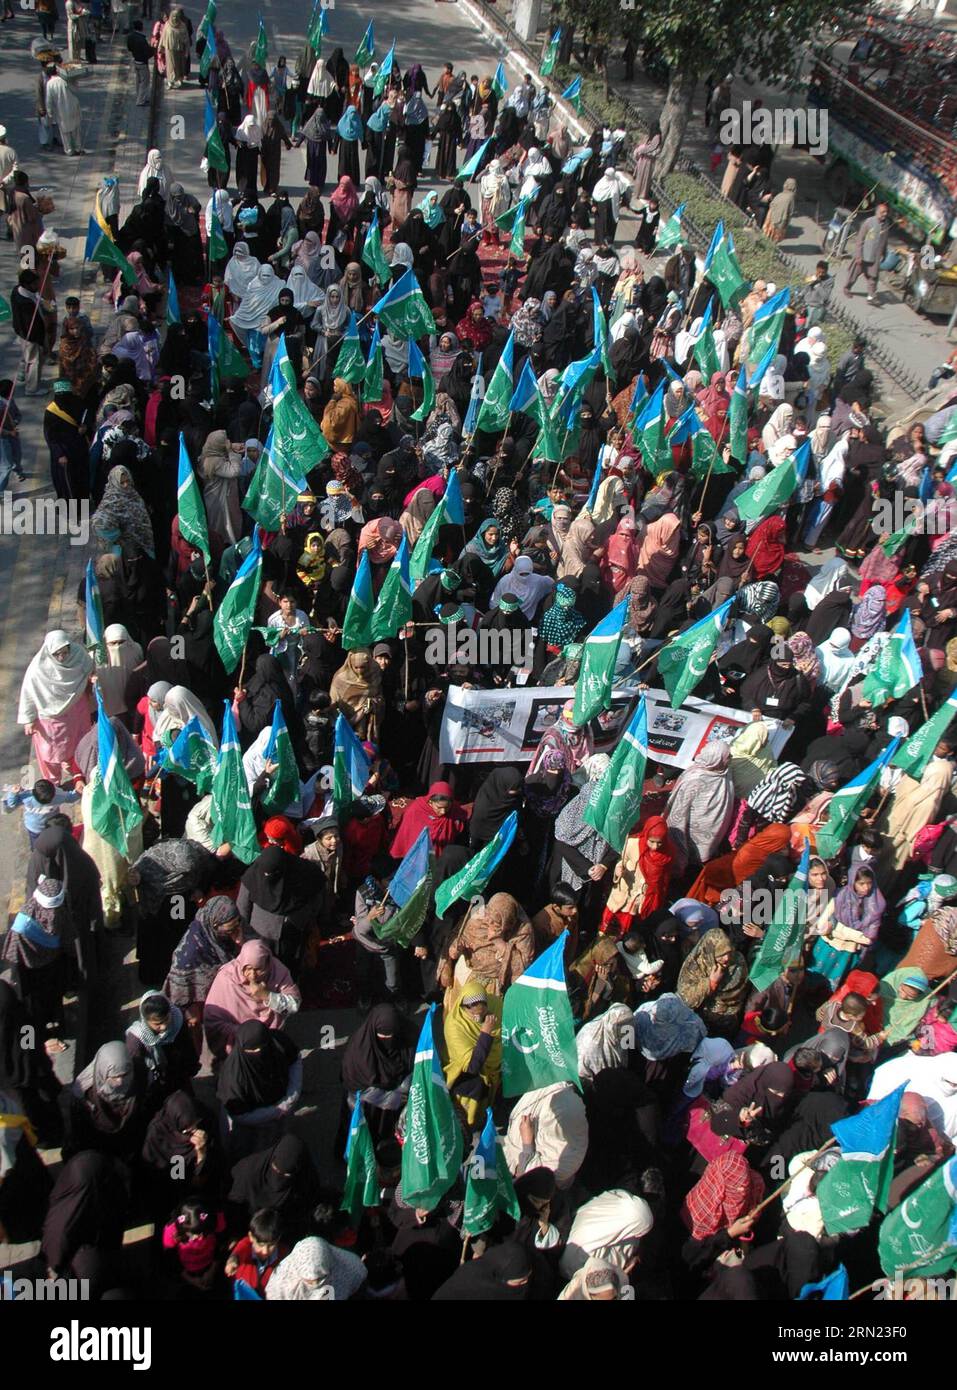 (150205) -- LAHORE, Feb. 5, 2015 -- Demonstrators attend the Kashmir Solidarity Day rally in eastern Pakistan s Lahore, Feb. 5, 2015. Pakistani Prime Minister Nawaz Sharif said on Thursday his country seeks meaningful and result oriented dialogue with India for the resolution of outstanding issues. However the agenda of Pakistan-India dialogue will remain inconclusive without inclusion of Kashmir dispute, he told legislators in Muzaffarabad, the capital of Pakistan-administered Kashmir. ) PAKISTAN-LAHORE-KASHMIR-SOLIDARITY DAY Sajjad PUBLICATIONxNOTxINxCHN   Lahore Feb 5 2015 demonstrator atte Stock Photo